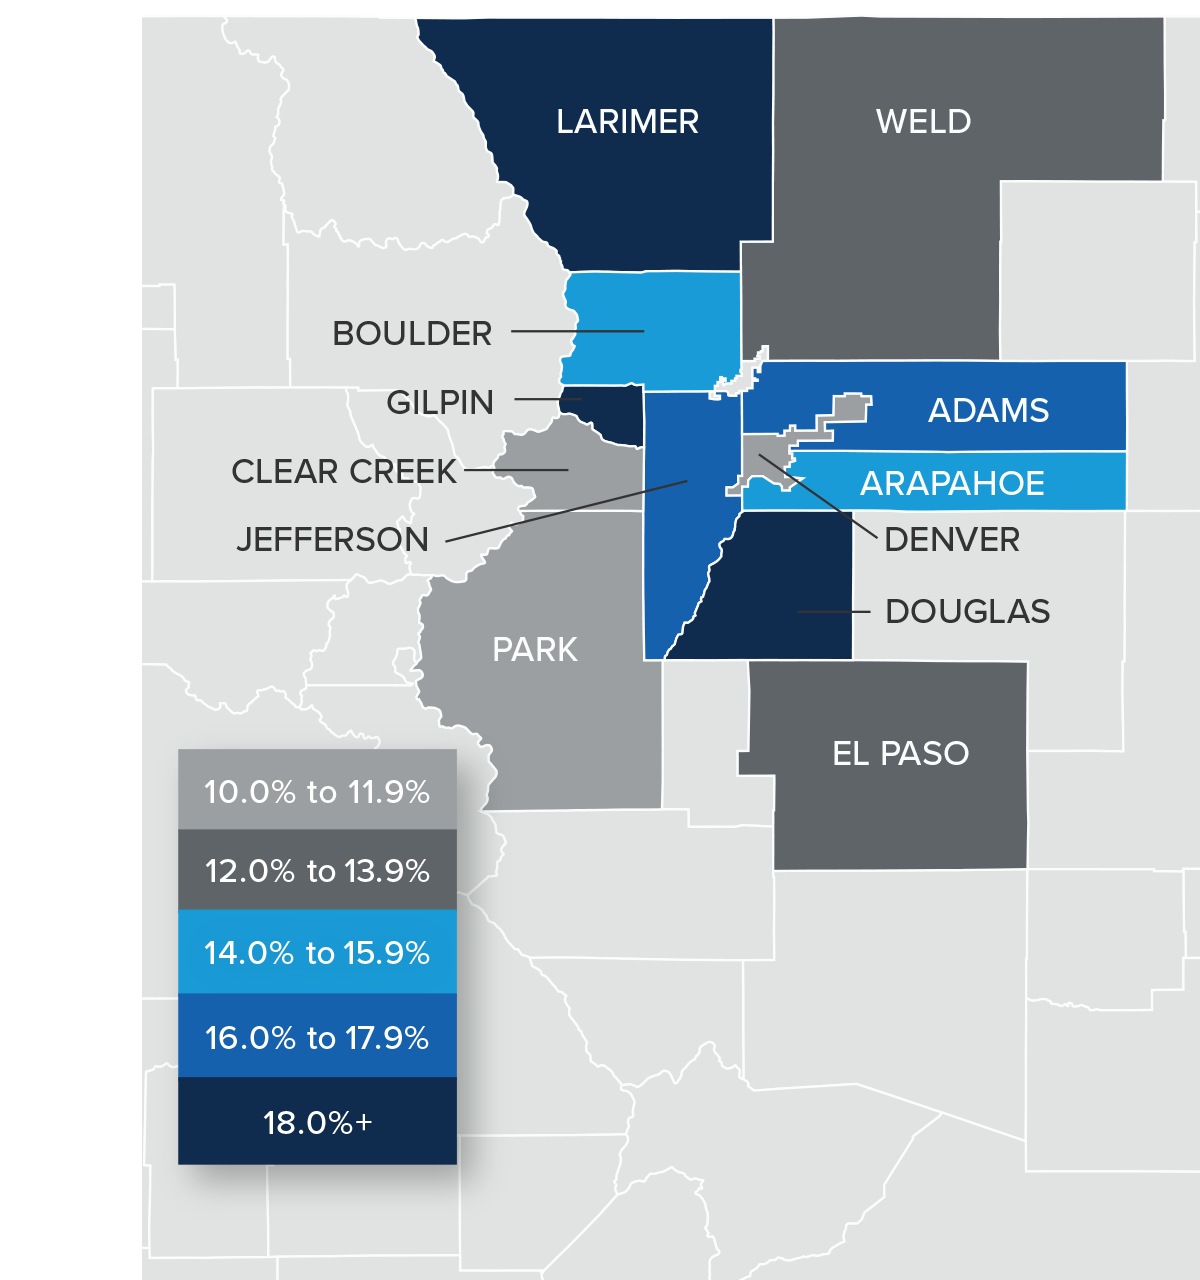 A map showing the year-over-year real estate market percentage changes in various counties in Colorado for Q1 2022.